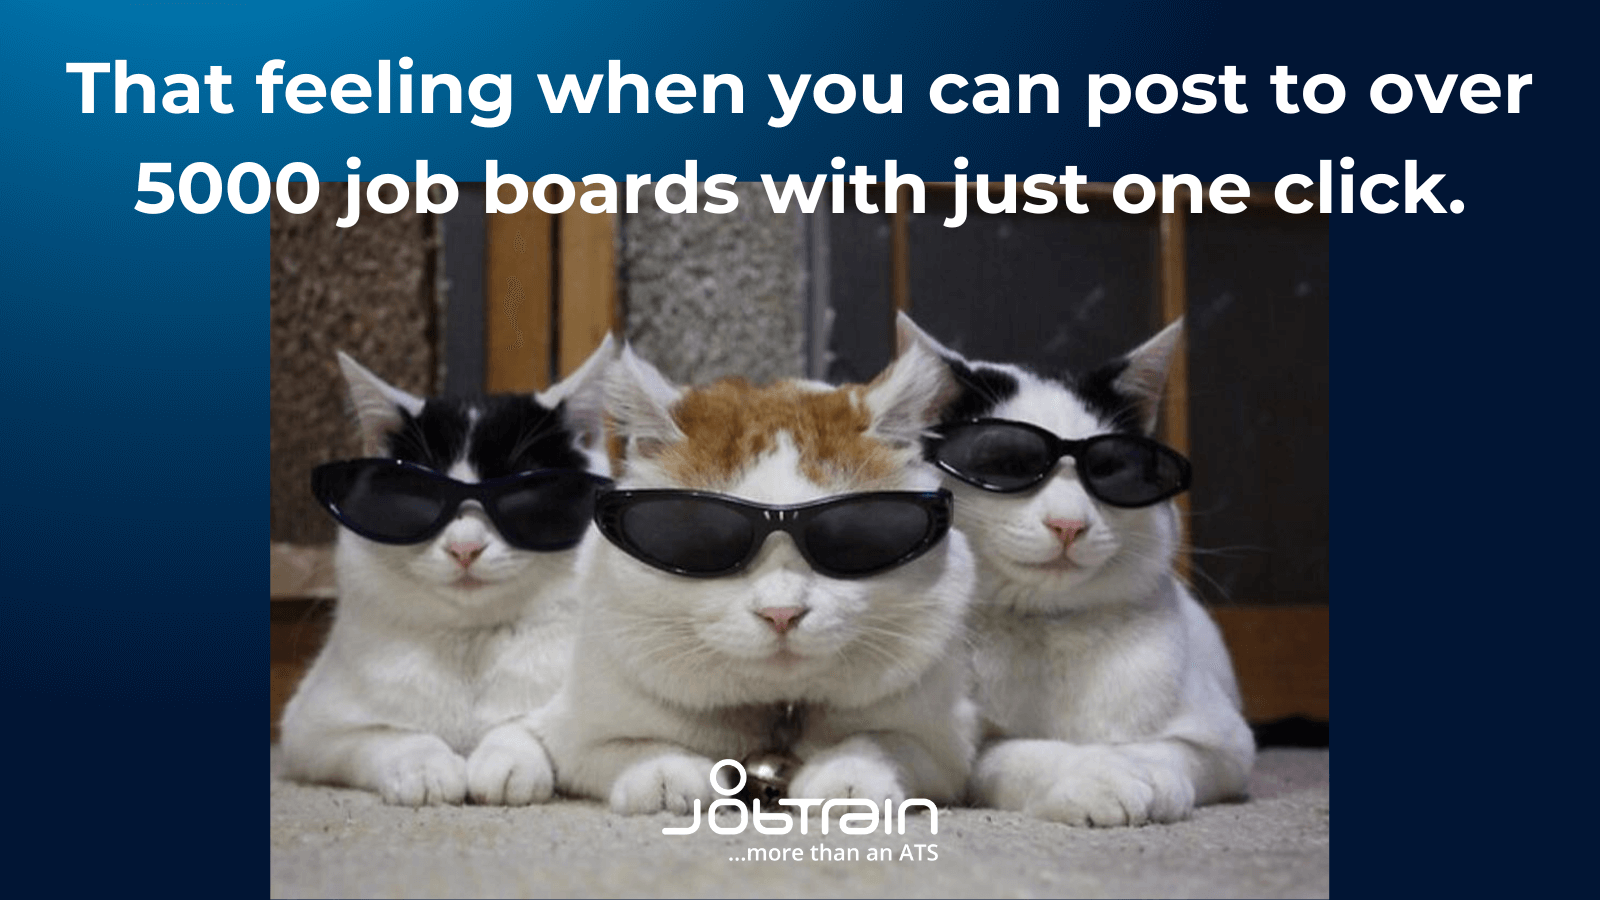 Cat meme job board marketplace 2https://jobtrain.co.uk/home/applicant-tracking-software-by-jobtrain/job-board-marketplace/